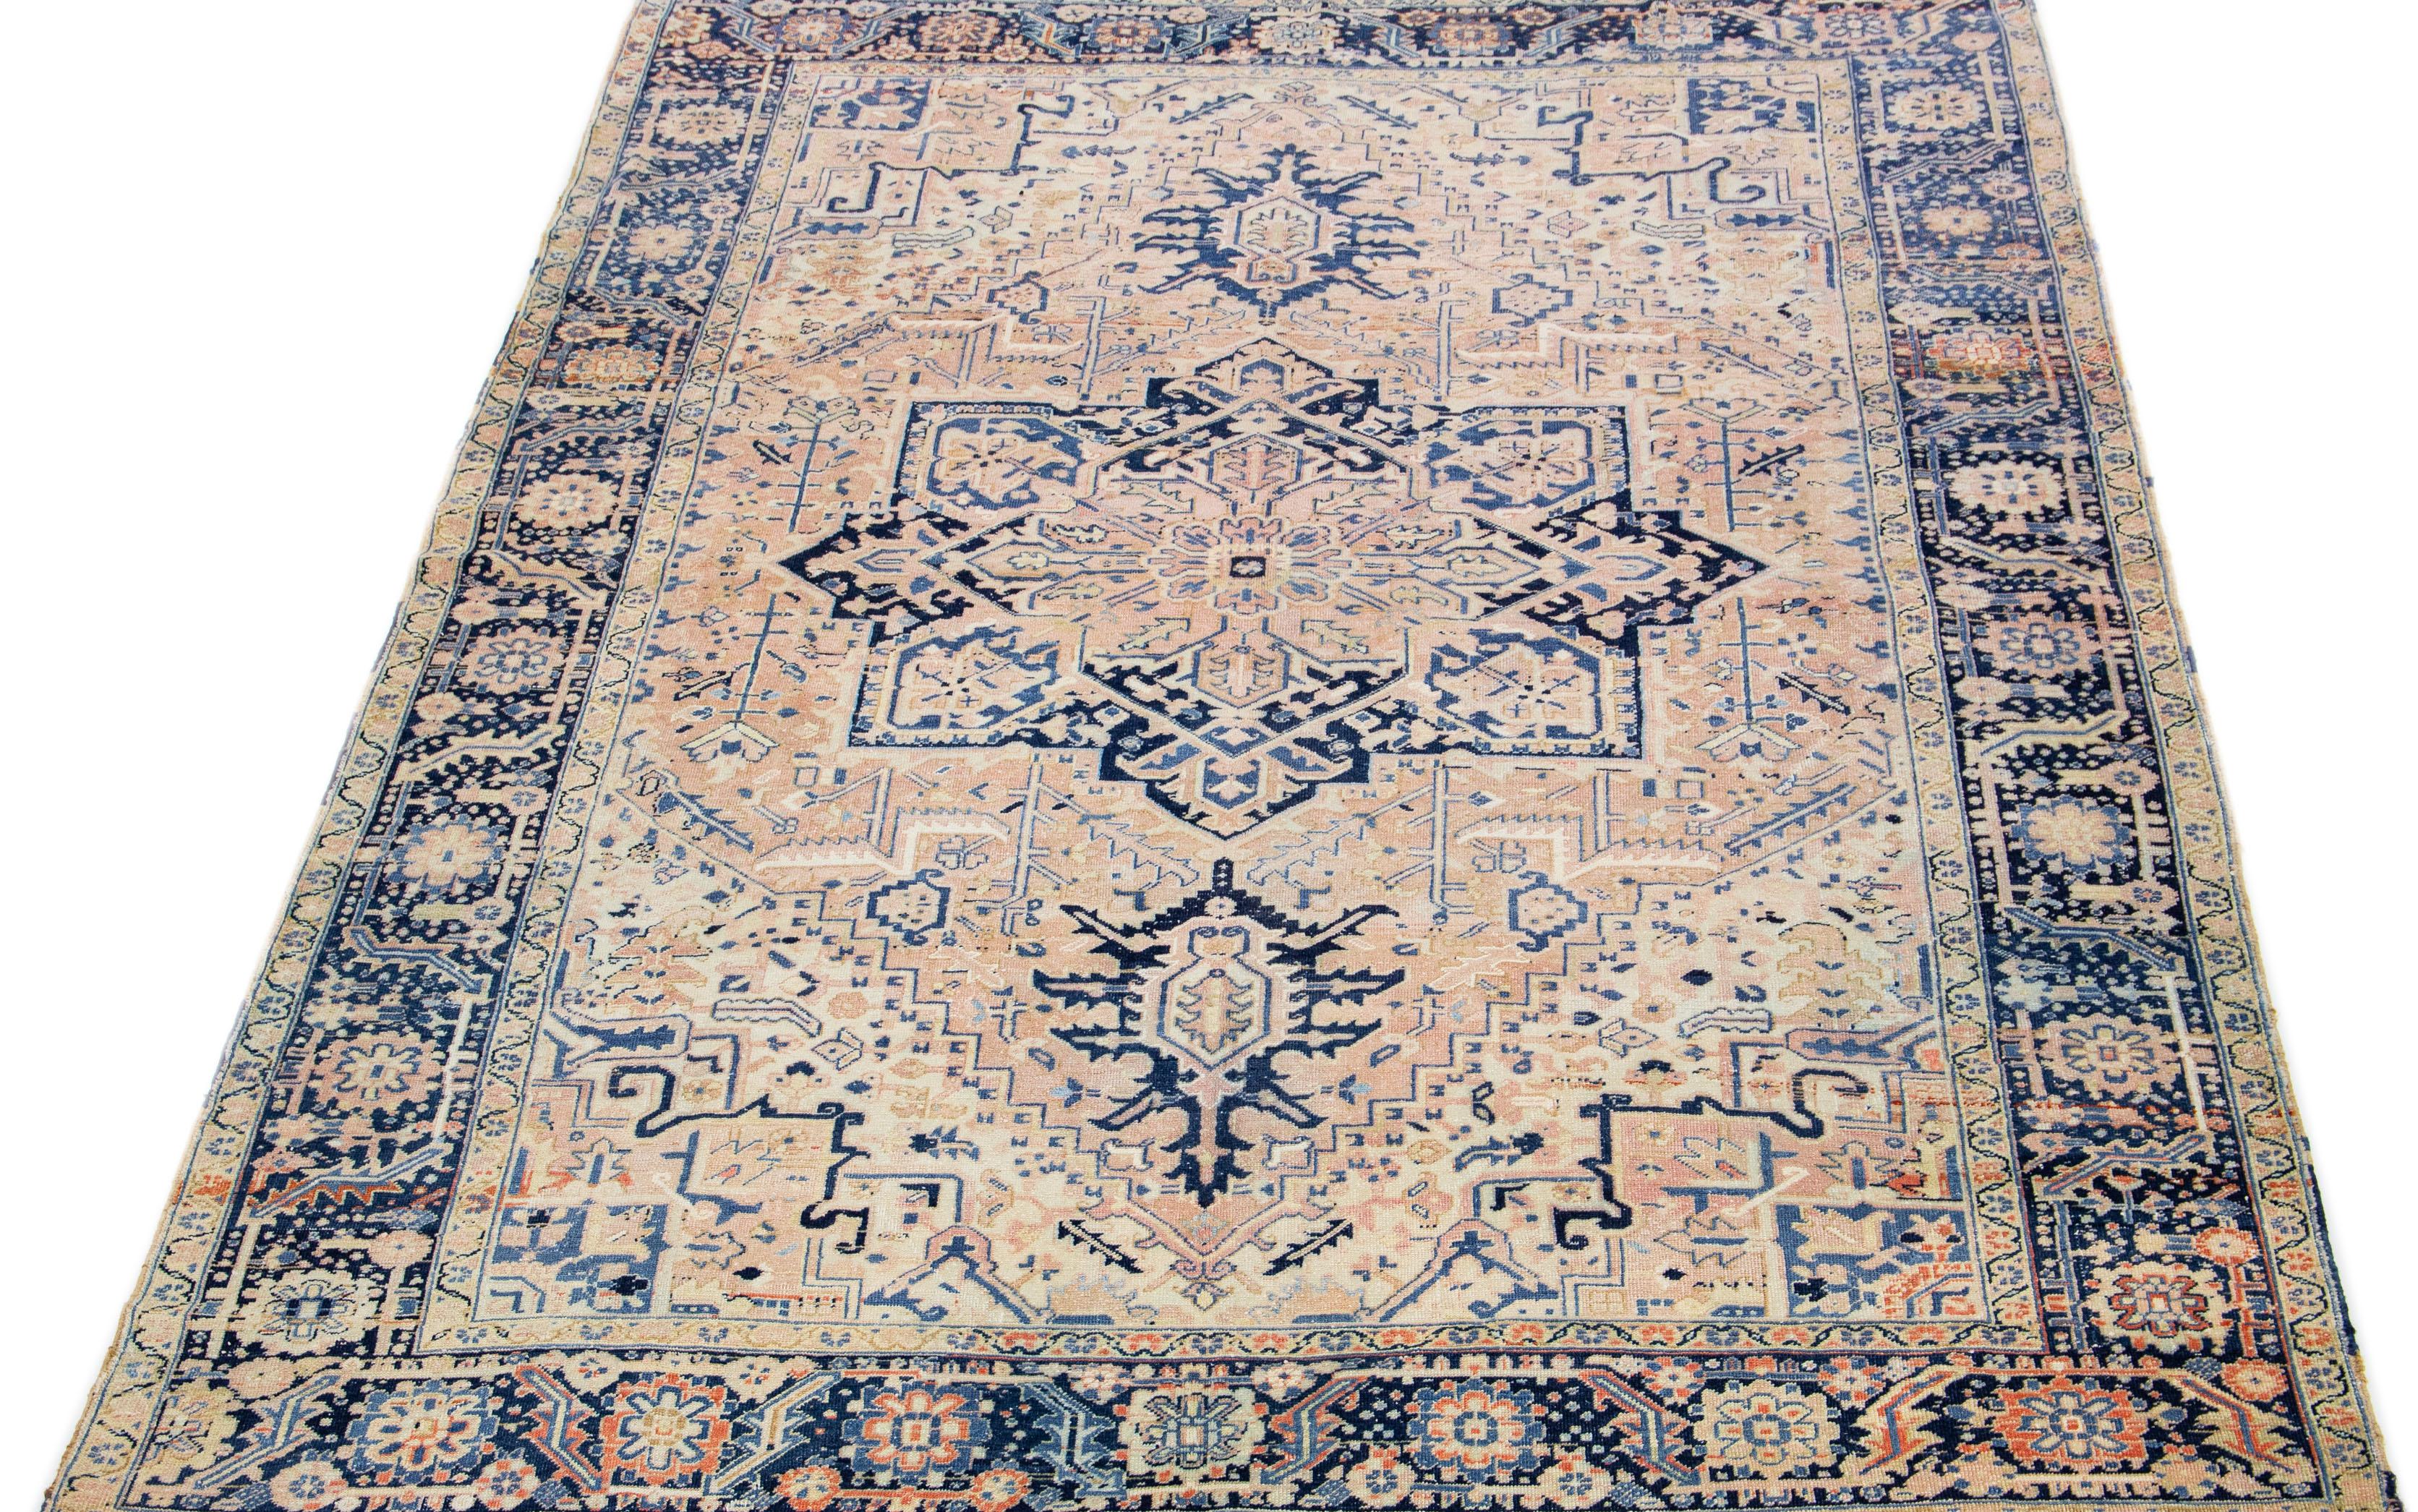 This Persian rug showcases a stunning all-over layout geometric medallion floral motif in shades of blue and ivory, set against a peach and beige field. Crafted from luxurious hand-knotted wool, this antique Heriz rug exudes timeless